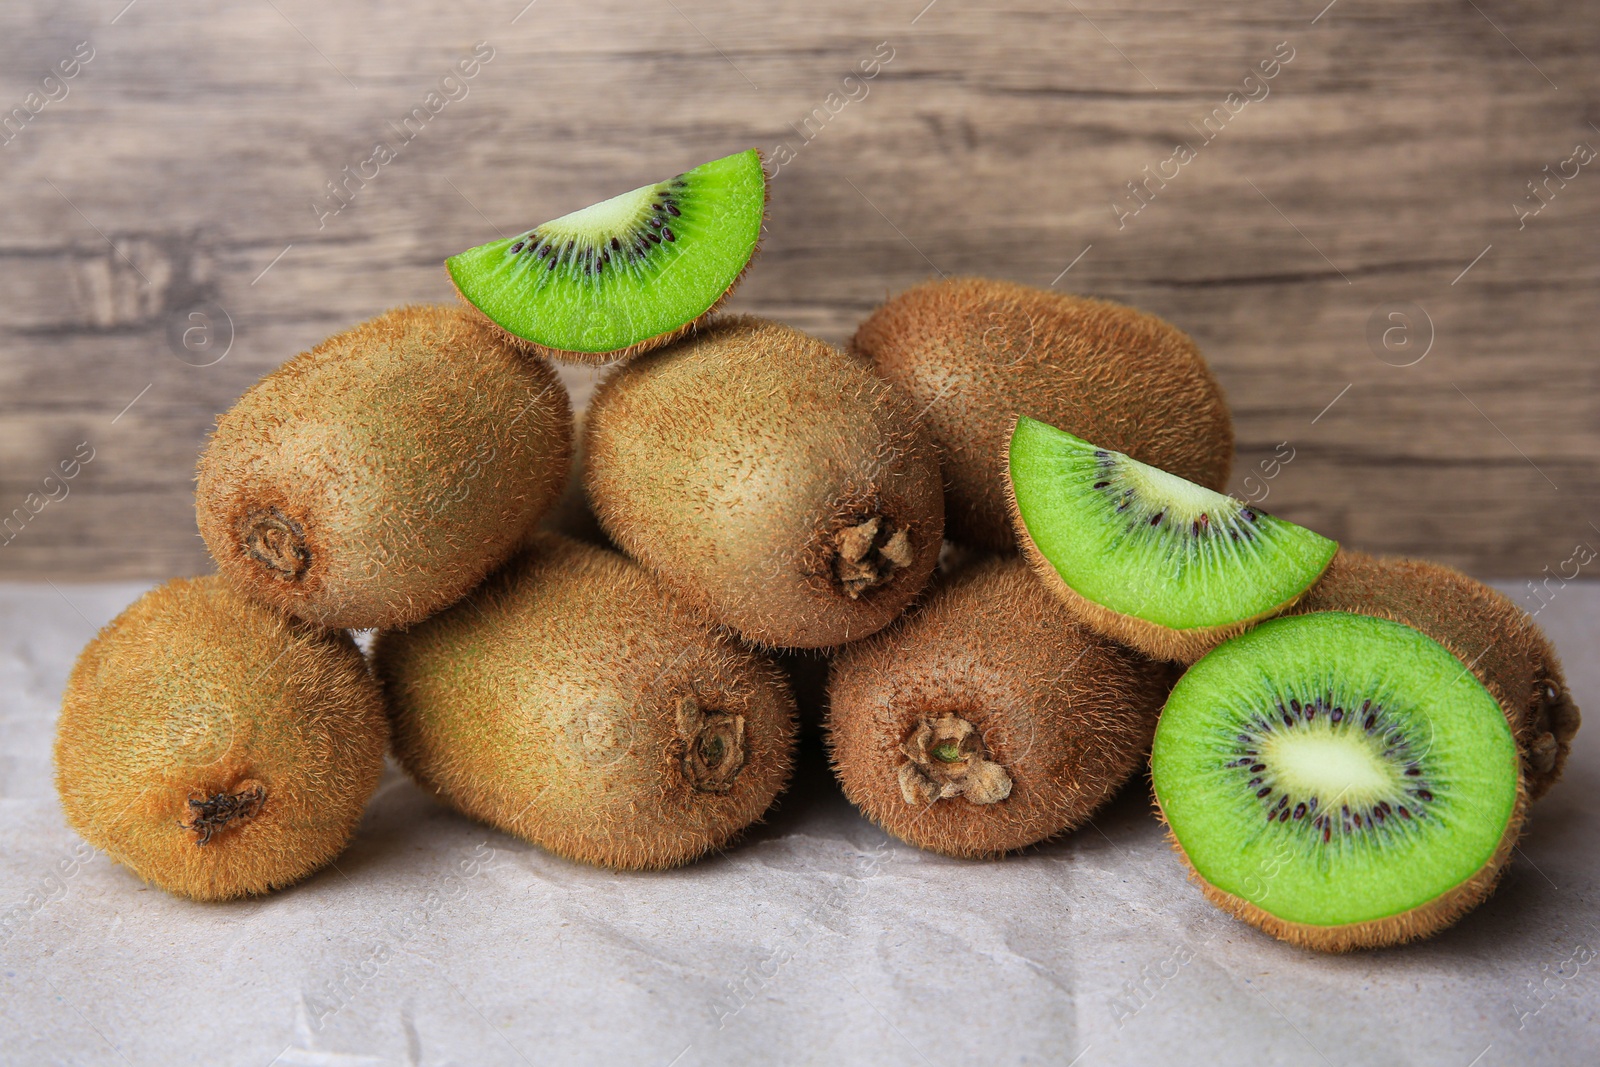 Photo of Heap of whole and cut fresh kiwis on parchment paper near wooden wall